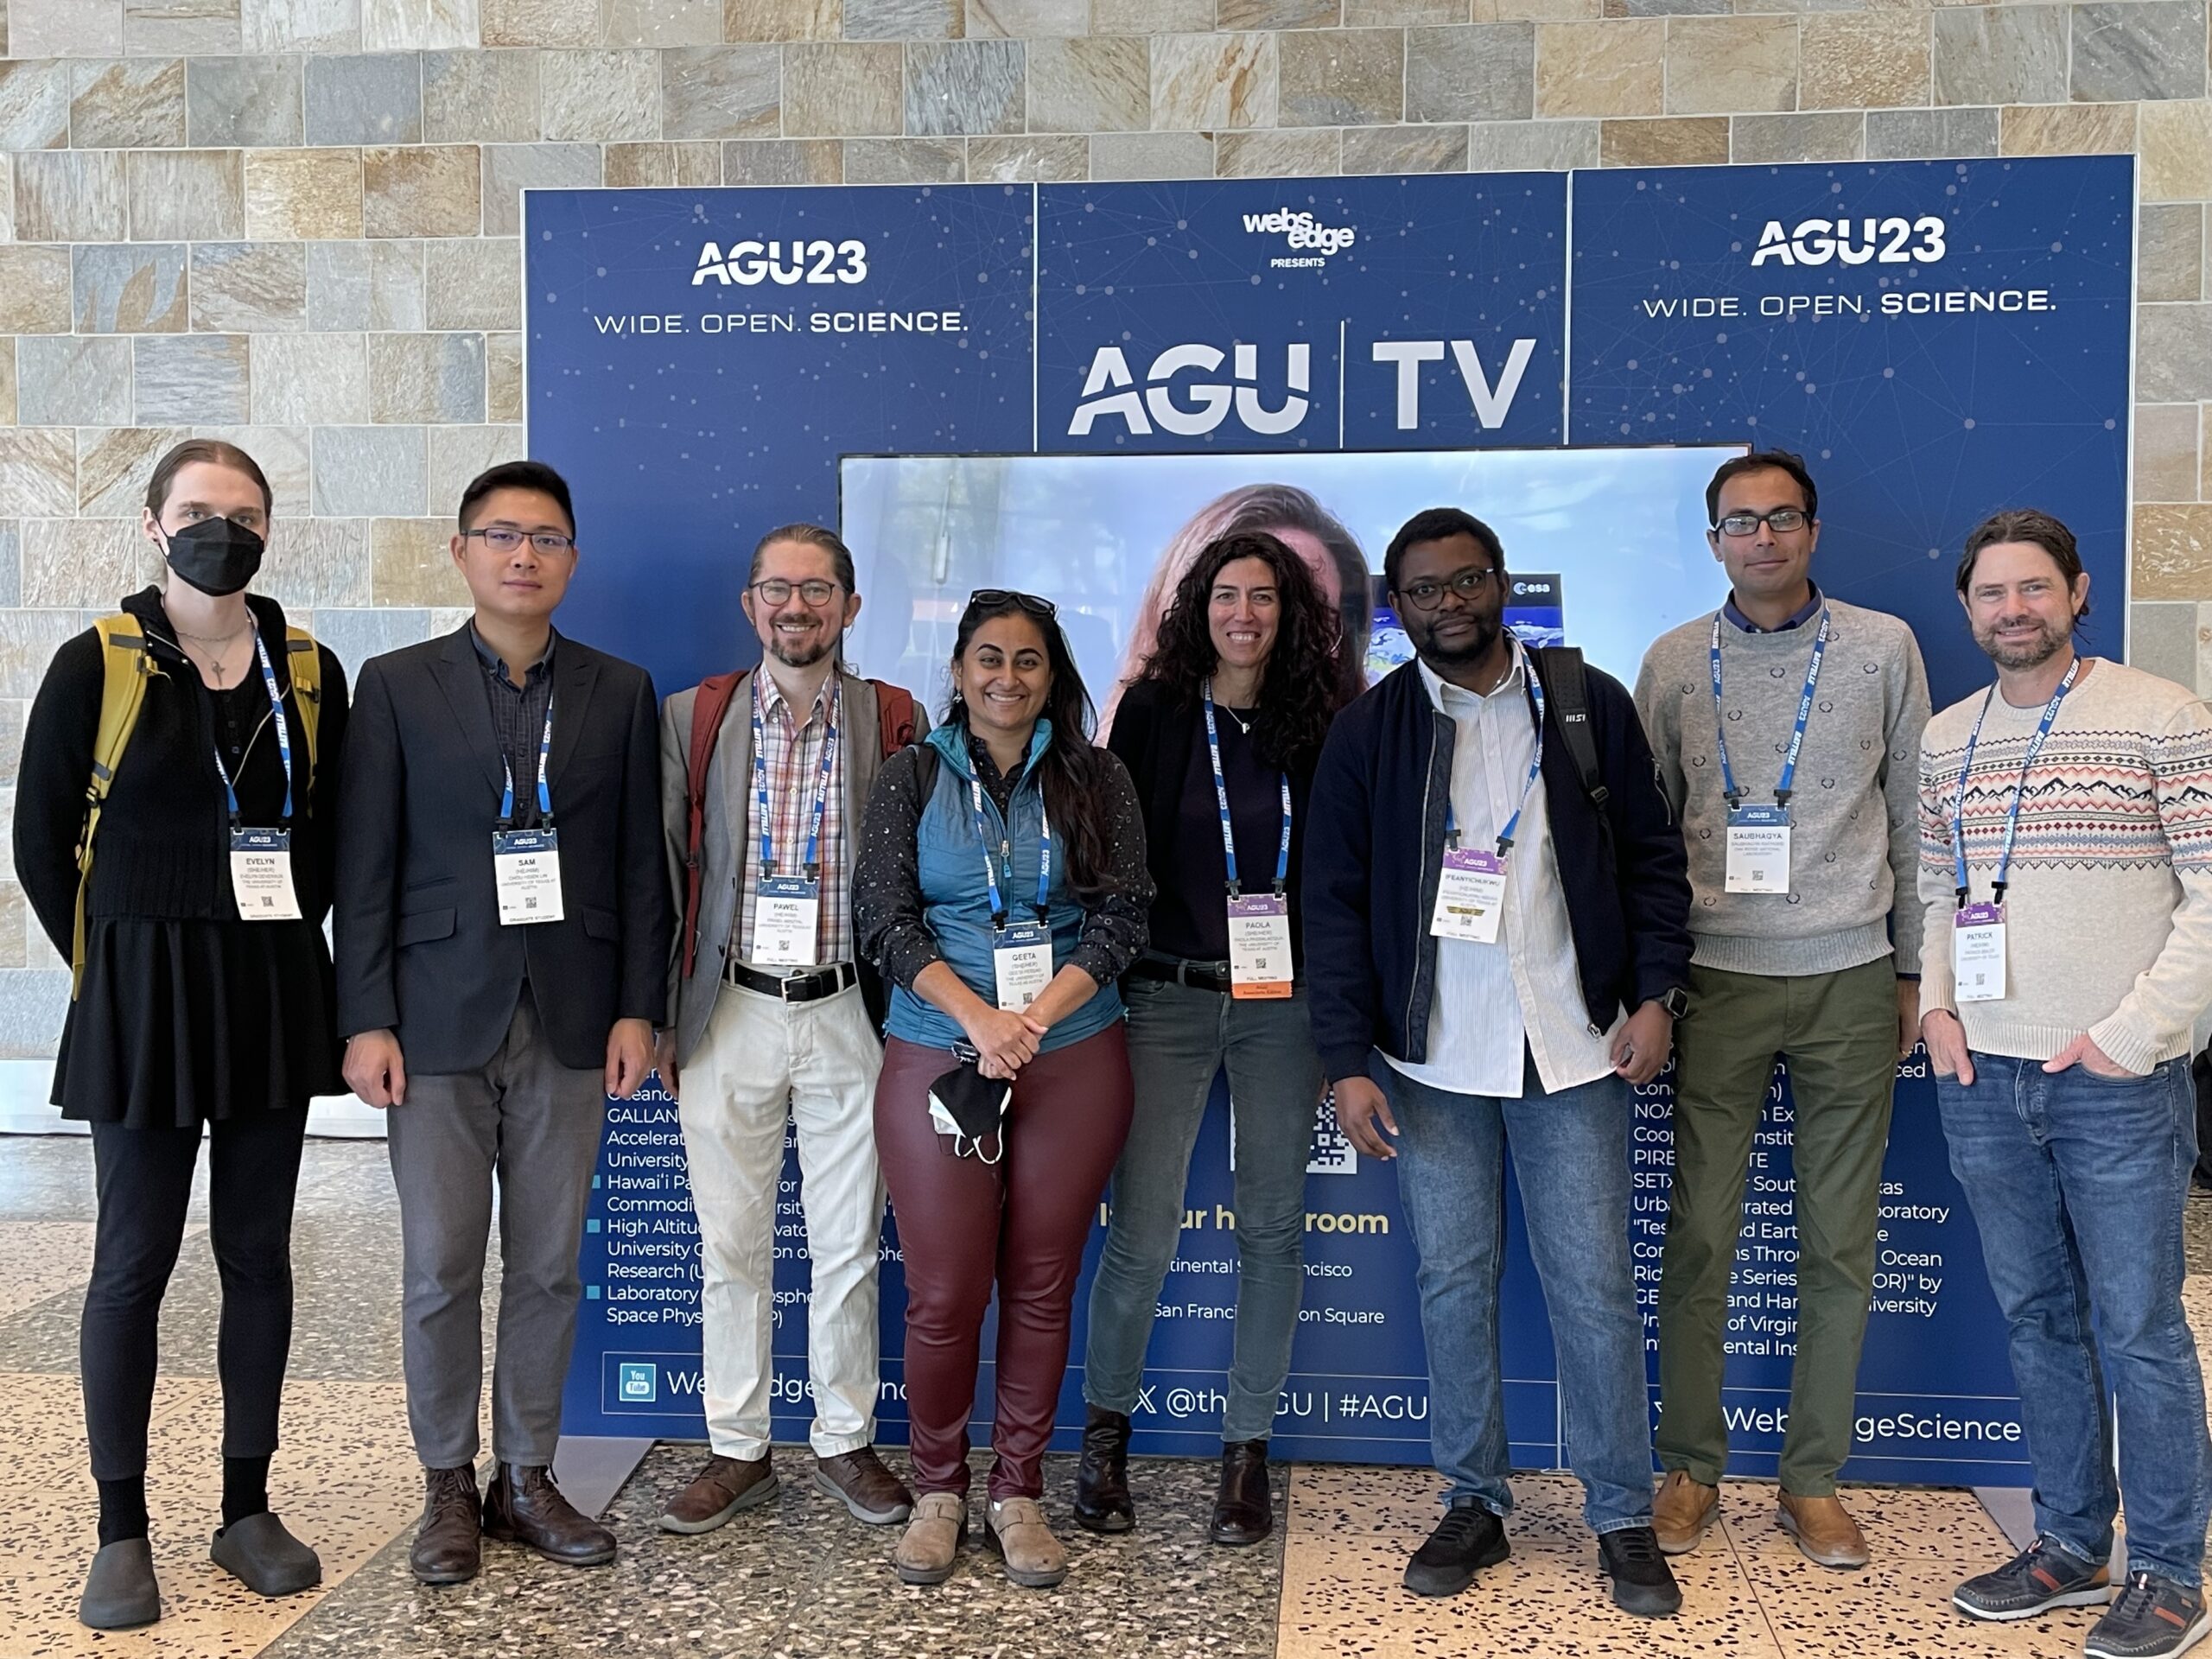 SETx-UIFL Members Joining the AGU23